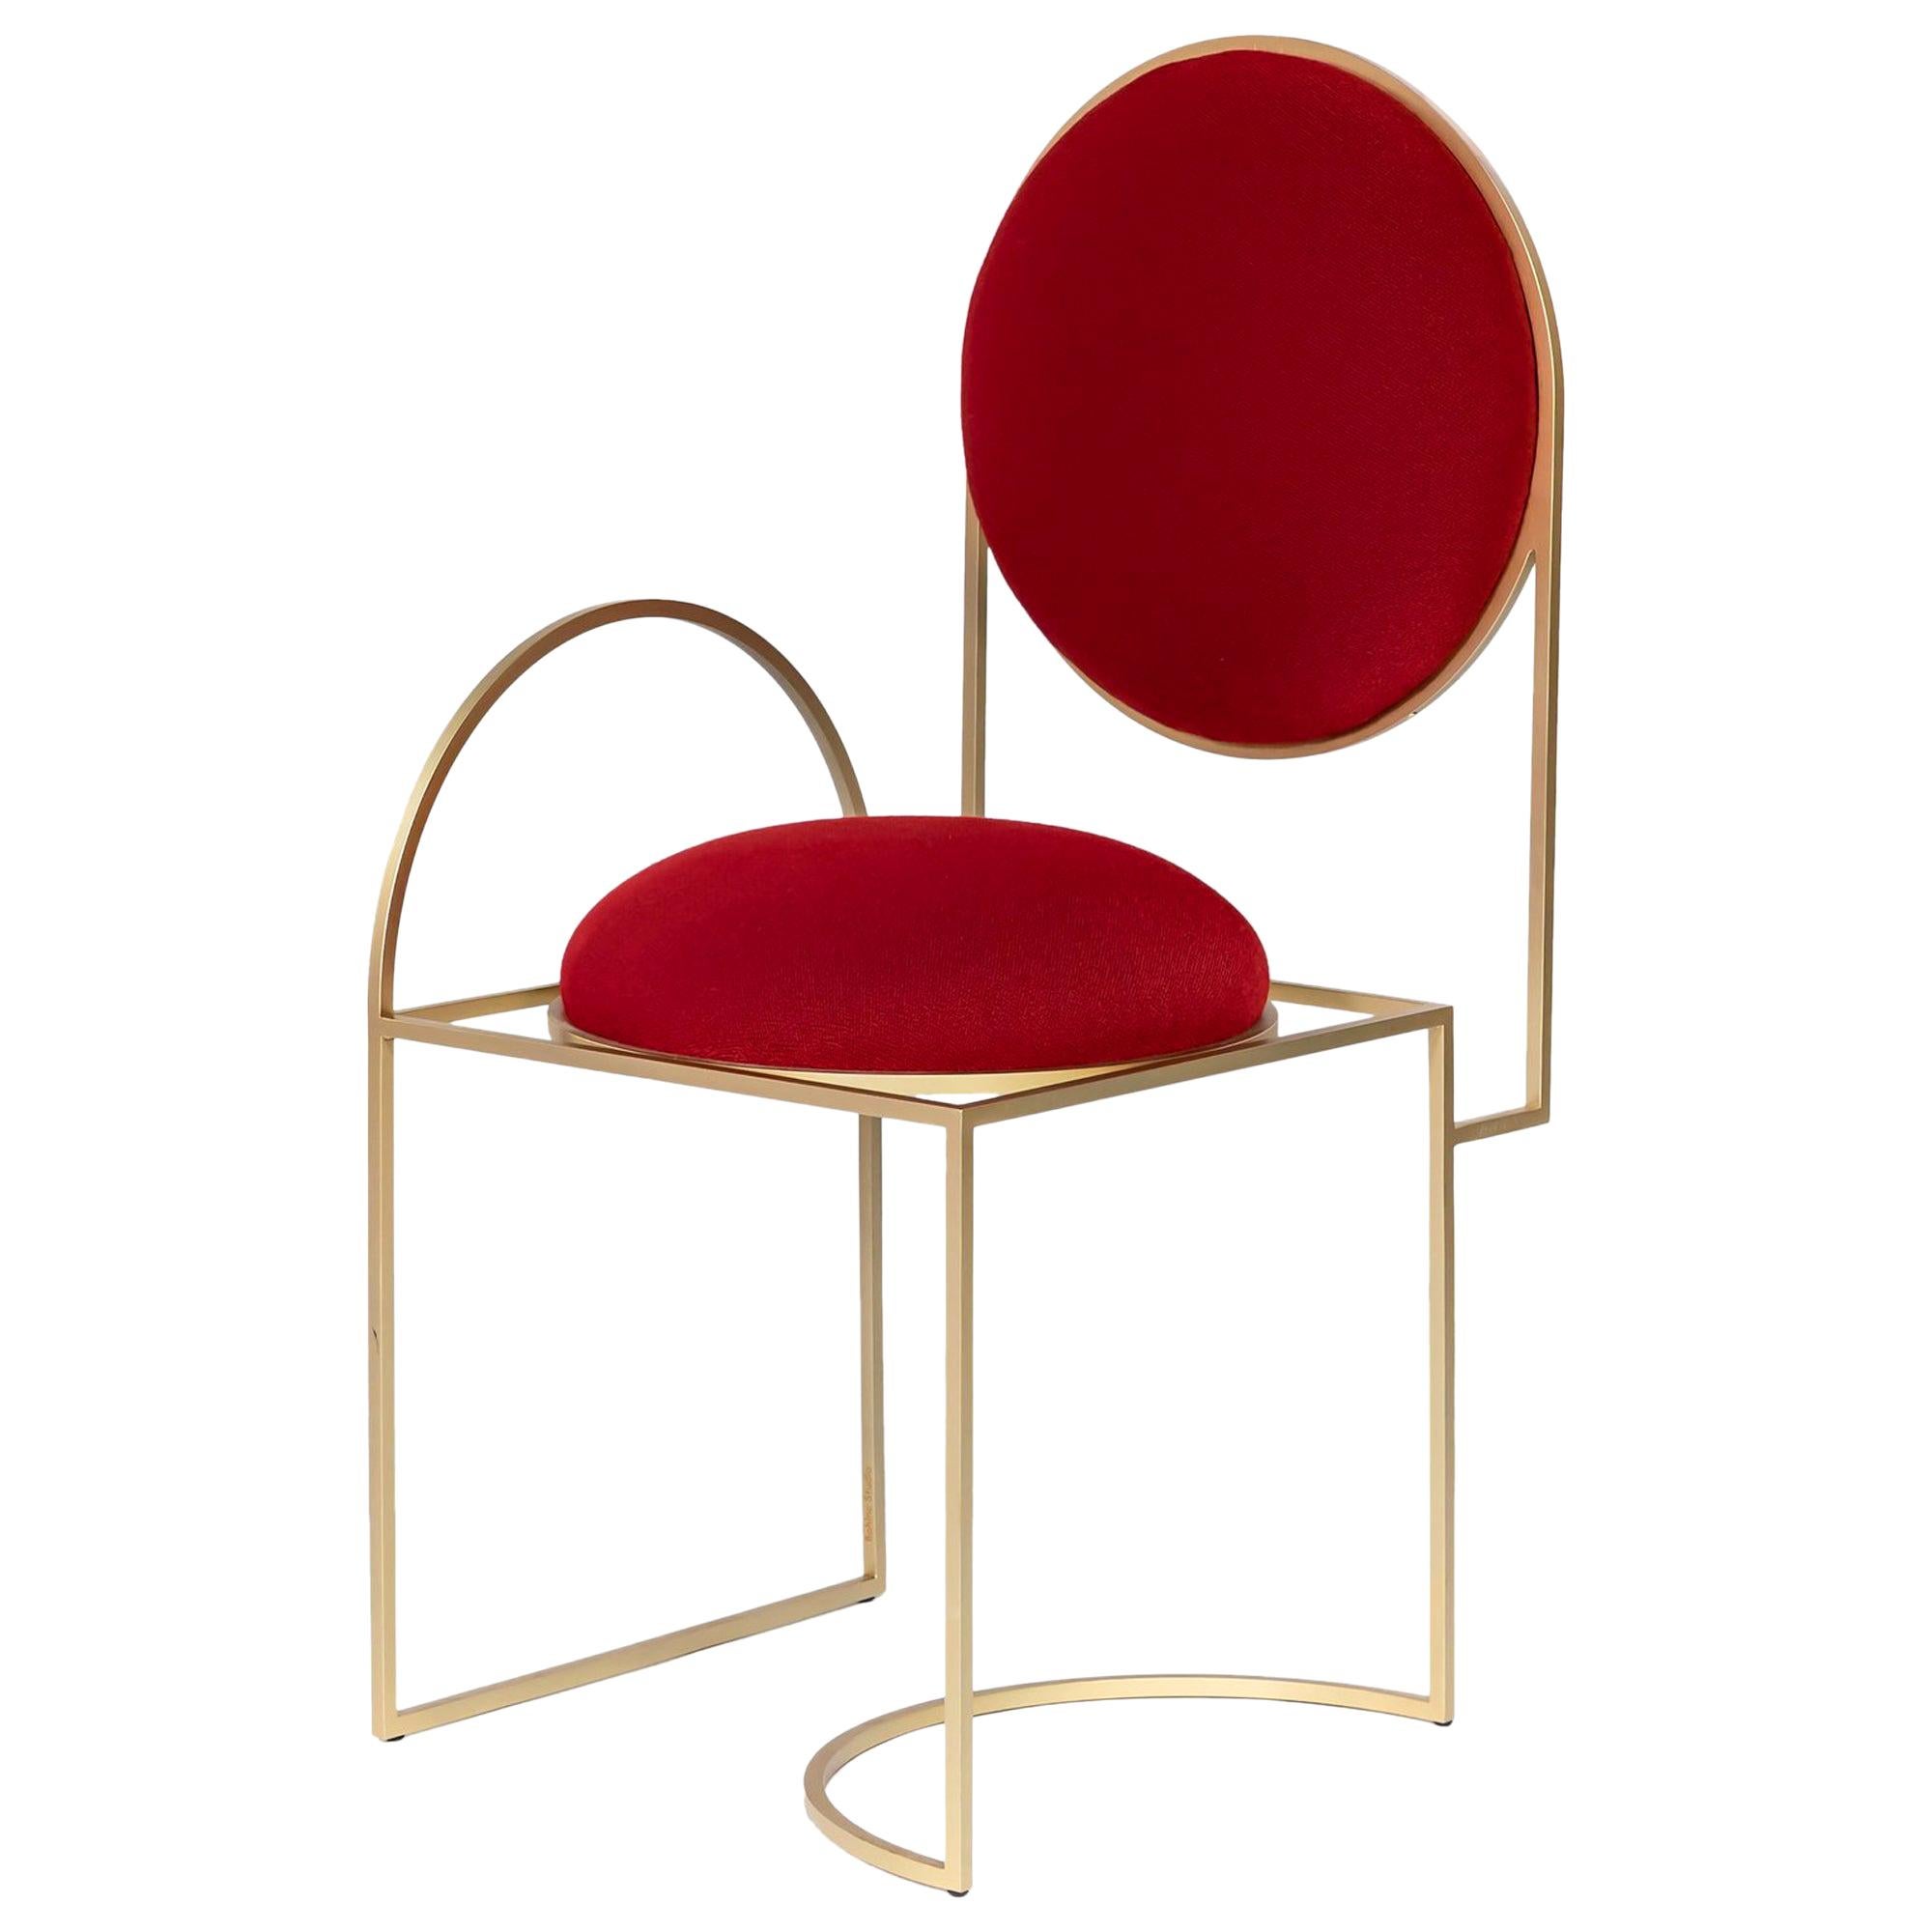 Solar Chair in Red Wool Fabric and Brushed Brass Frame by Lara Bohinc